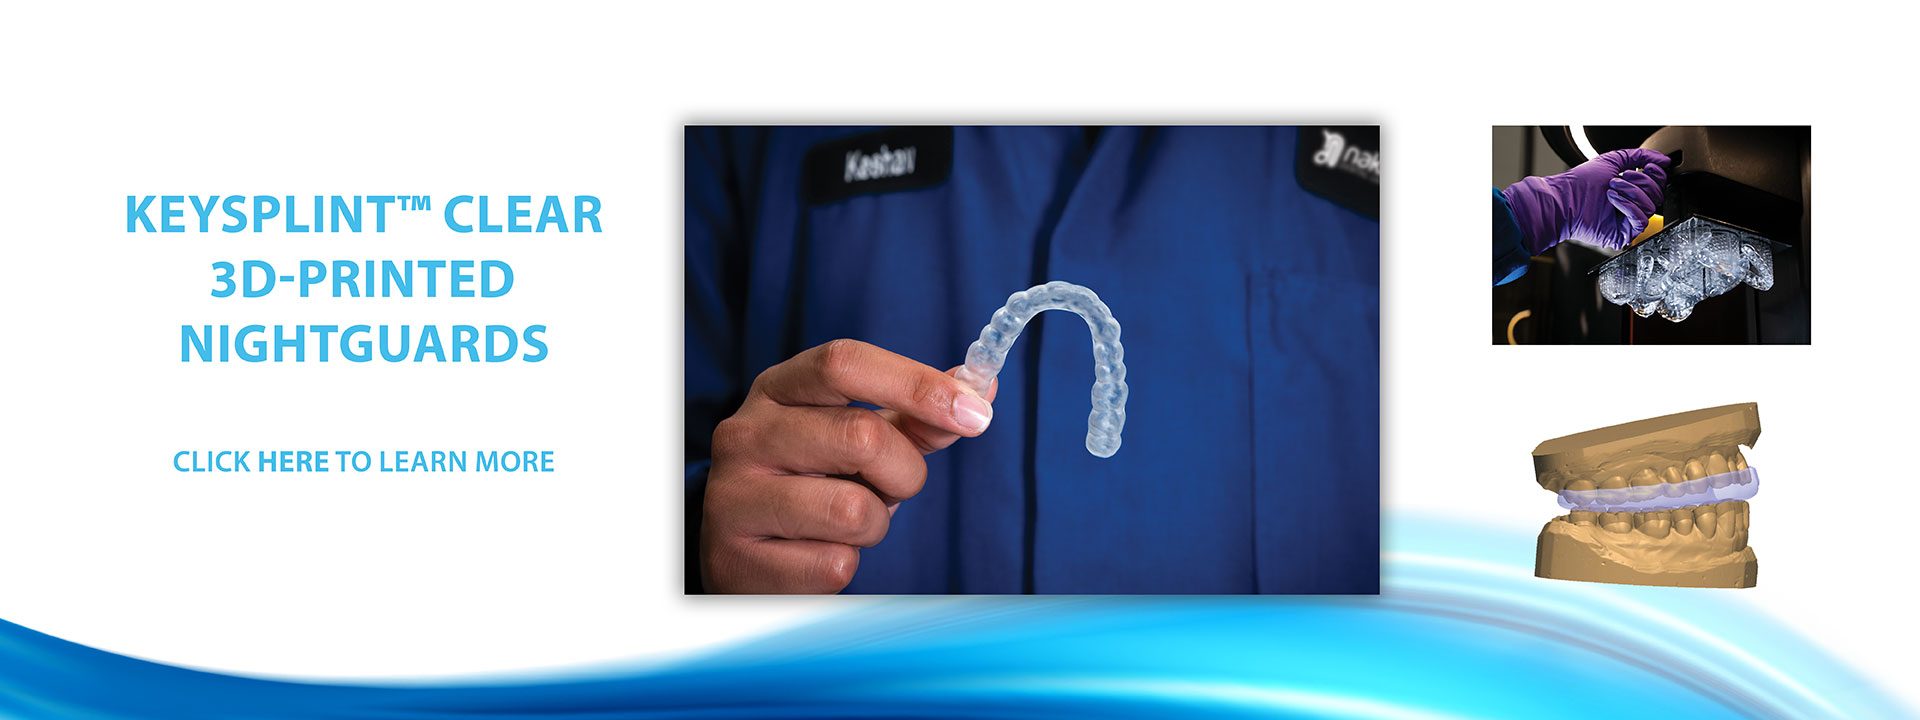 KeySplint Clear 3d-printed nightguards. Click here to learn more.